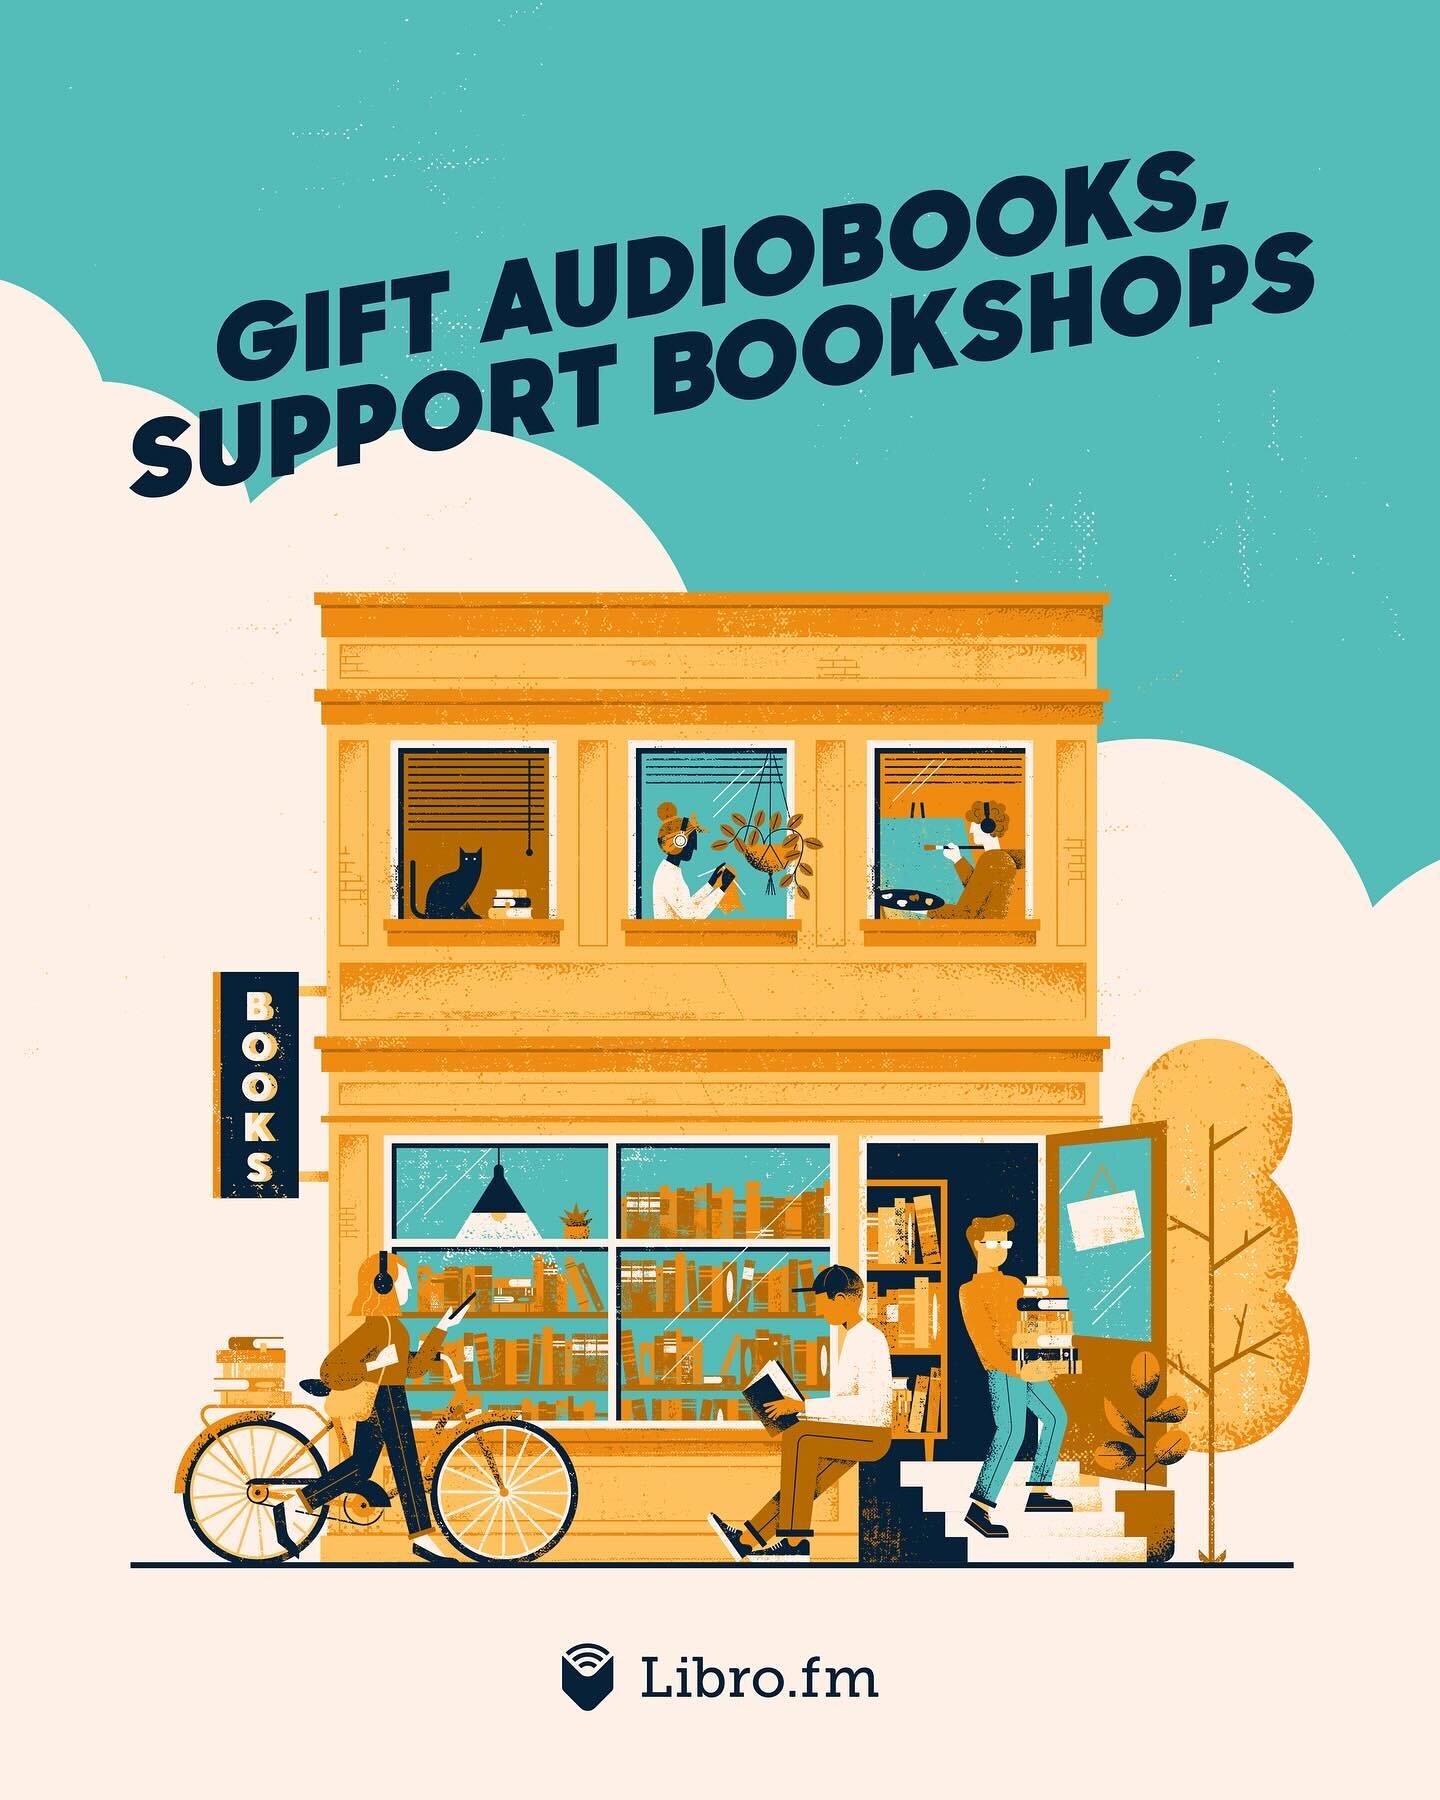 New work: I recently teamed up with @librofm, the audiobook platform, on this illustration that champions the charm of small bookshops. 📚✨

Last year, I worked on an ad campaign for a certain giant-owned audiobook platform that shall remain nameless